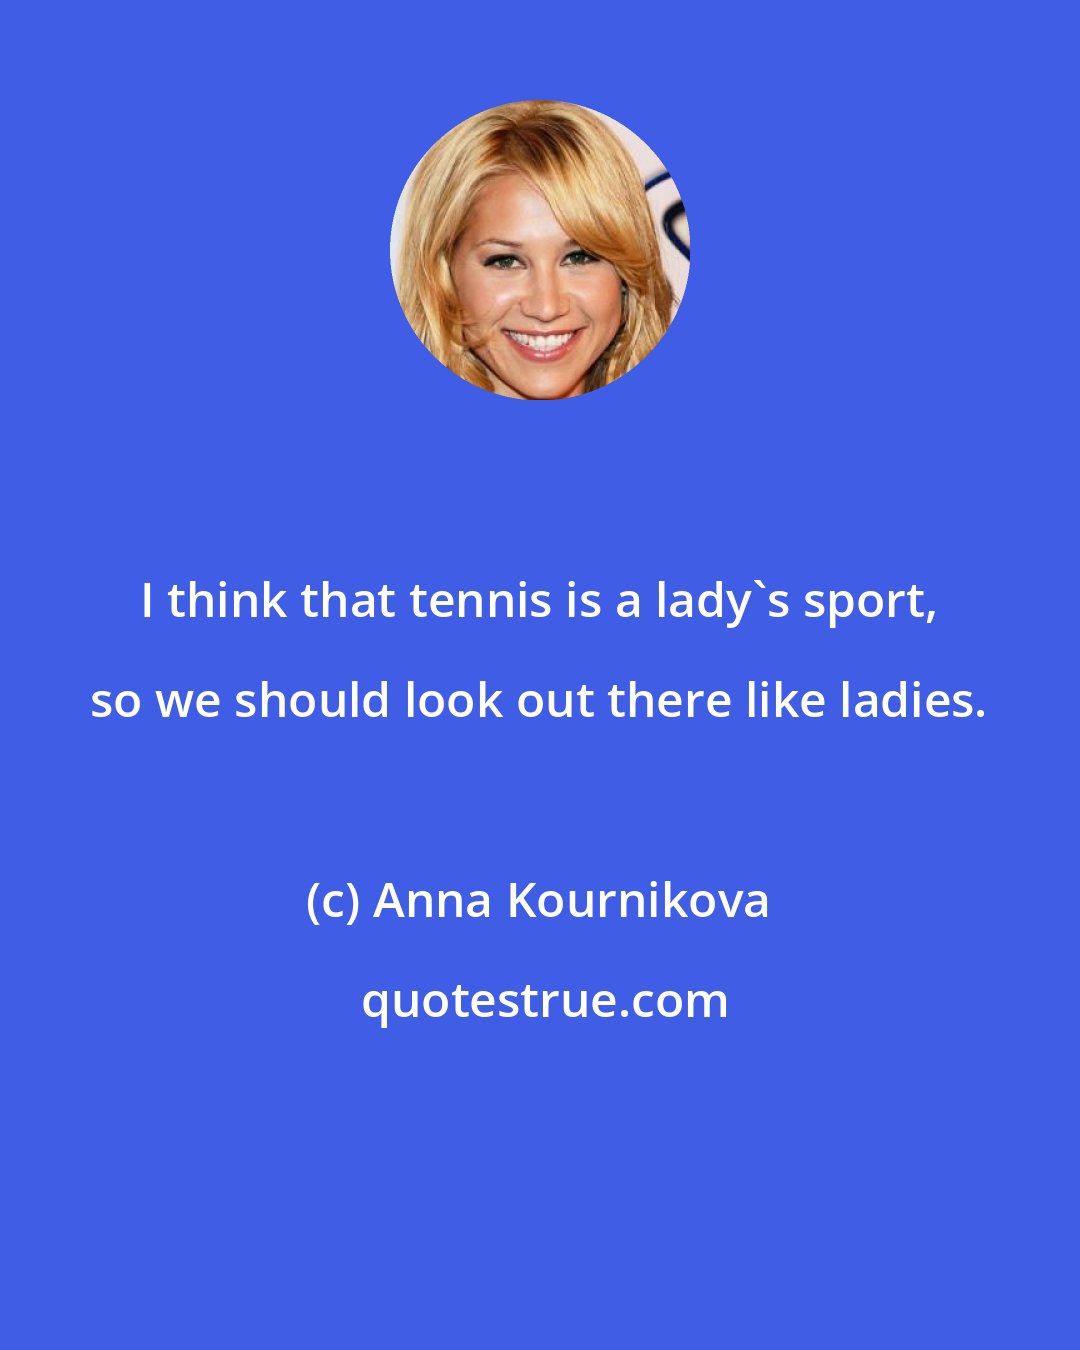 Anna Kournikova: I think that tennis is a lady's sport, so we should look out there like ladies.